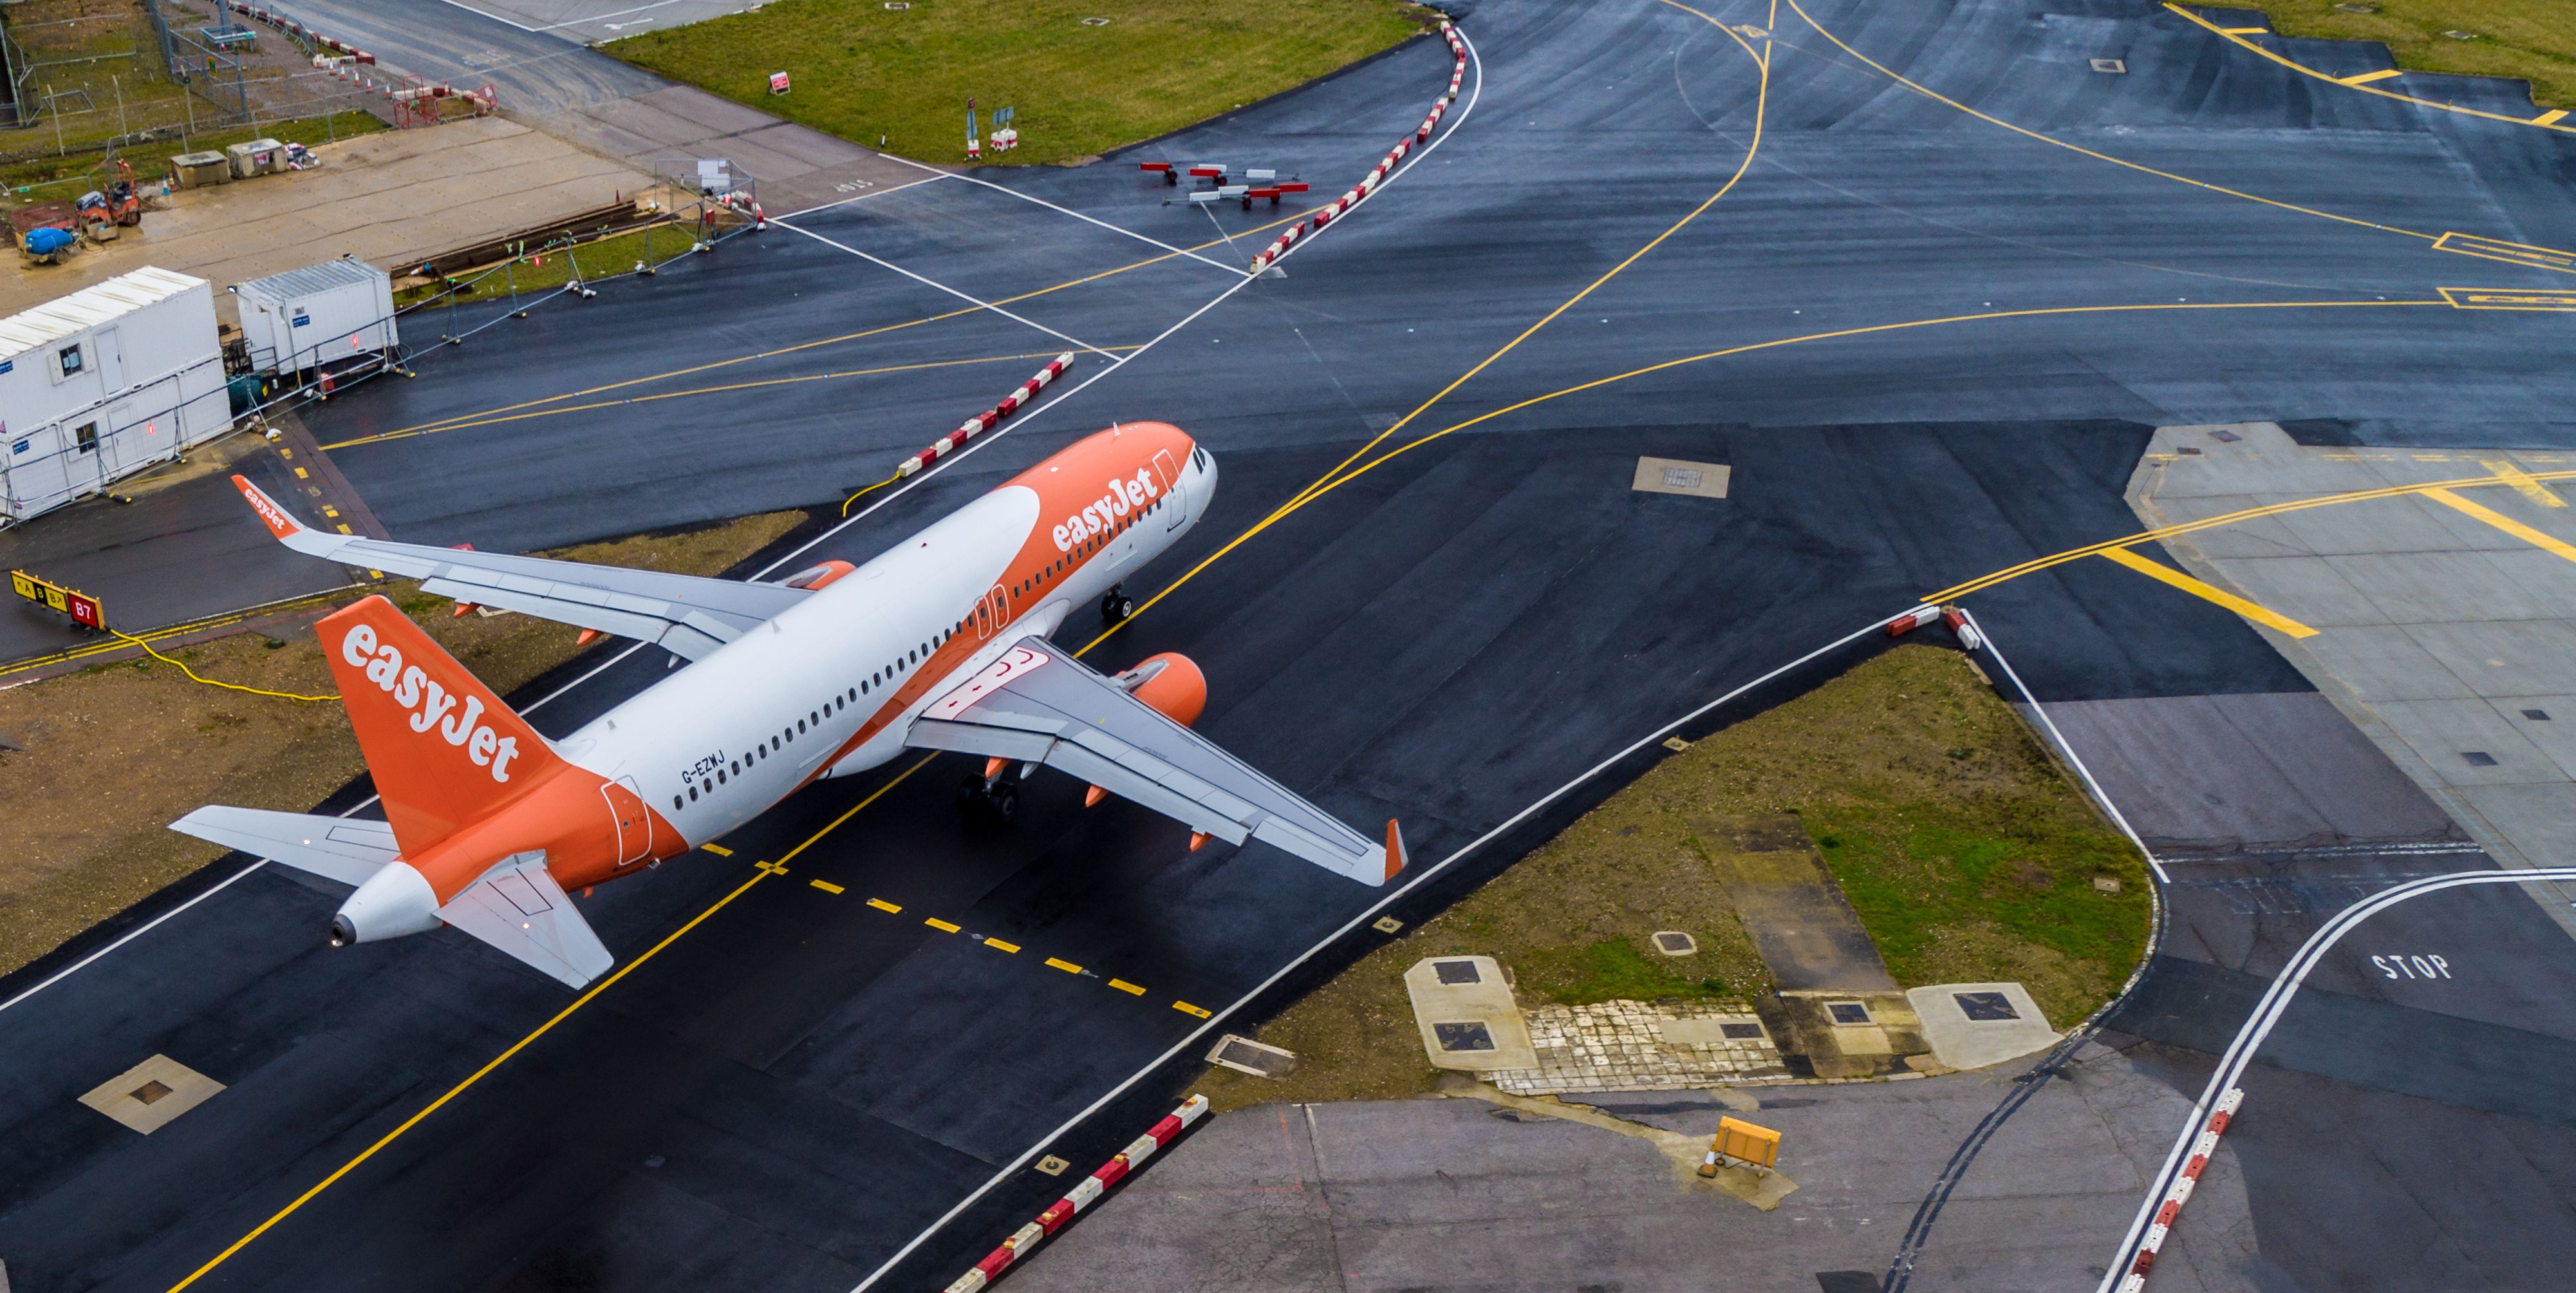 EasyJet Airbus A320 taxiing at Luton Airport